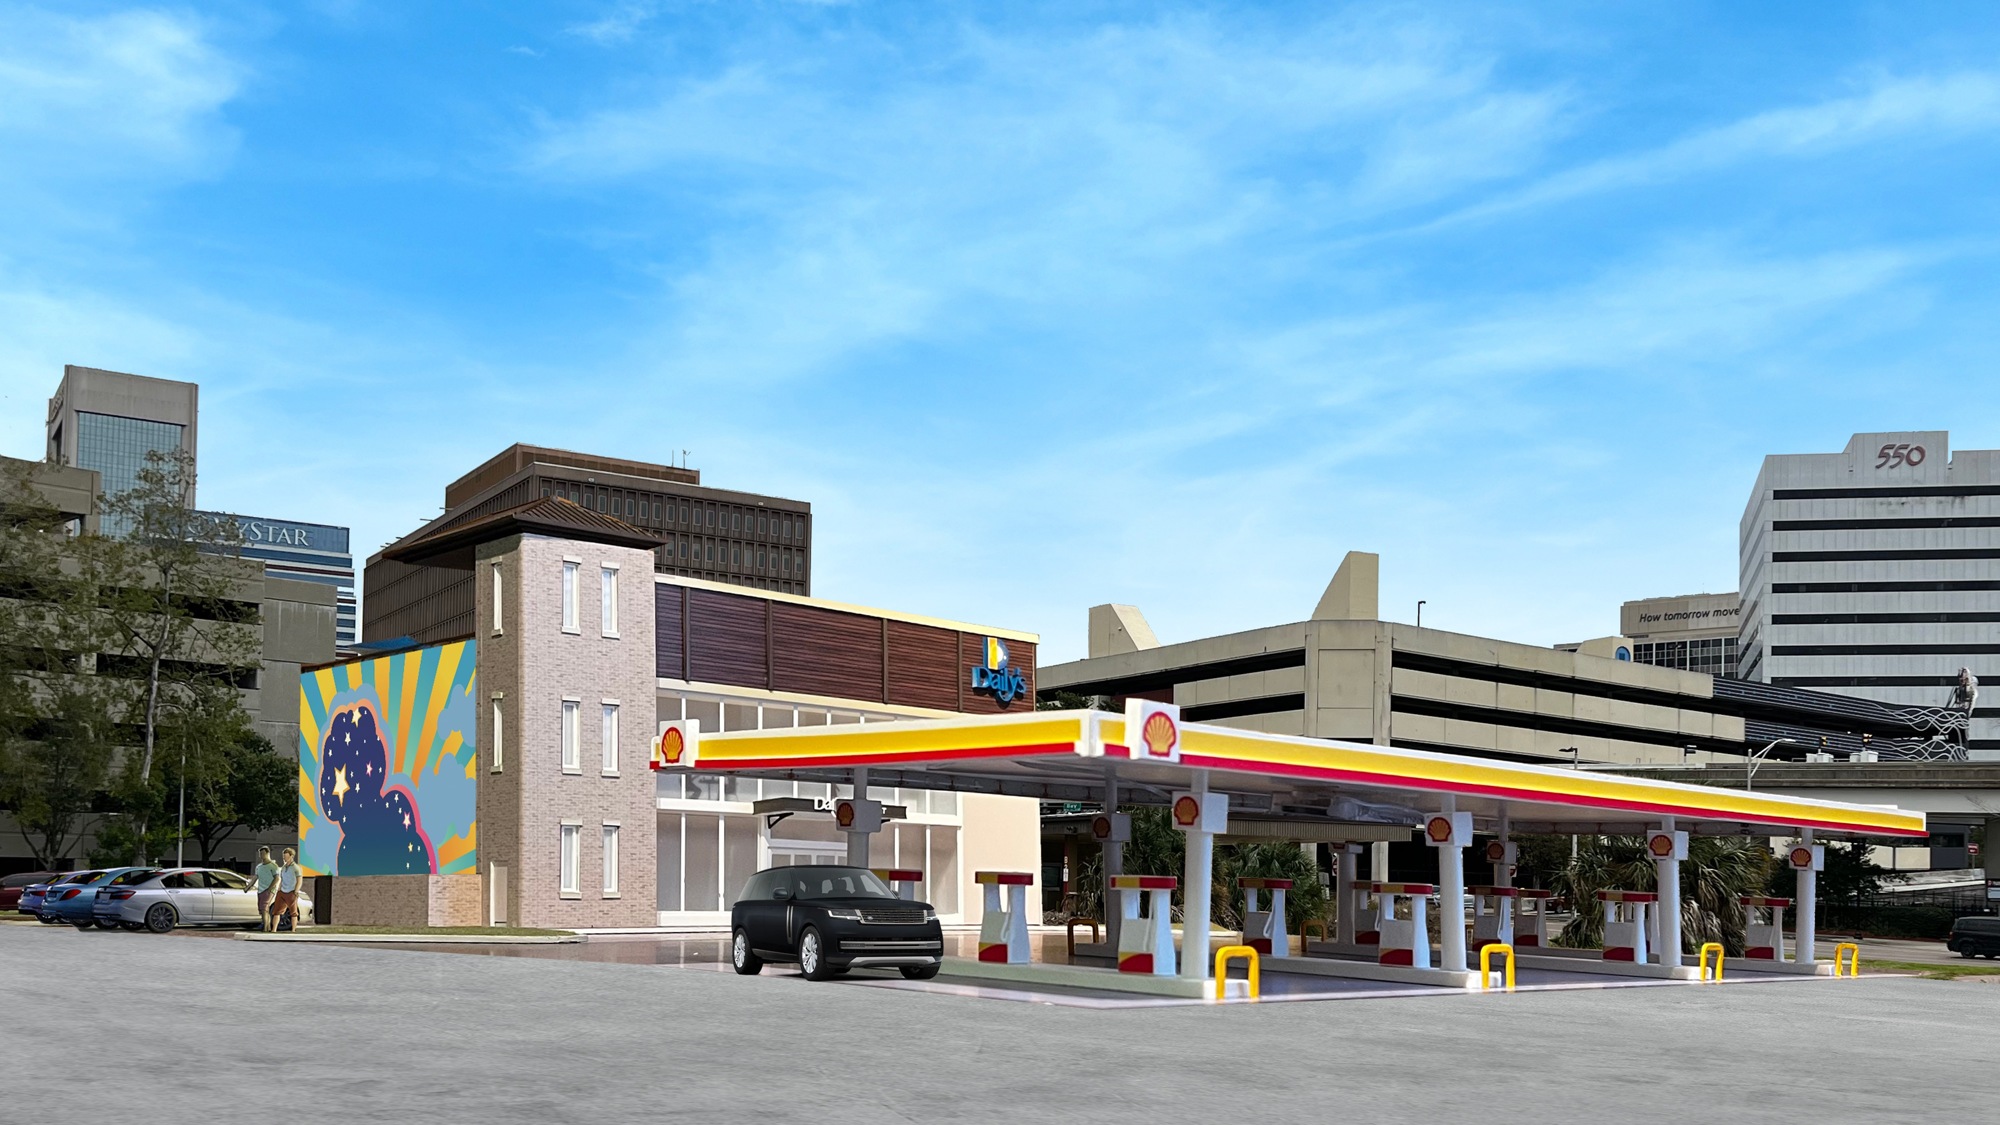 First Coast Energy  owns and develops the Daily’s gas station and convenience store brand.